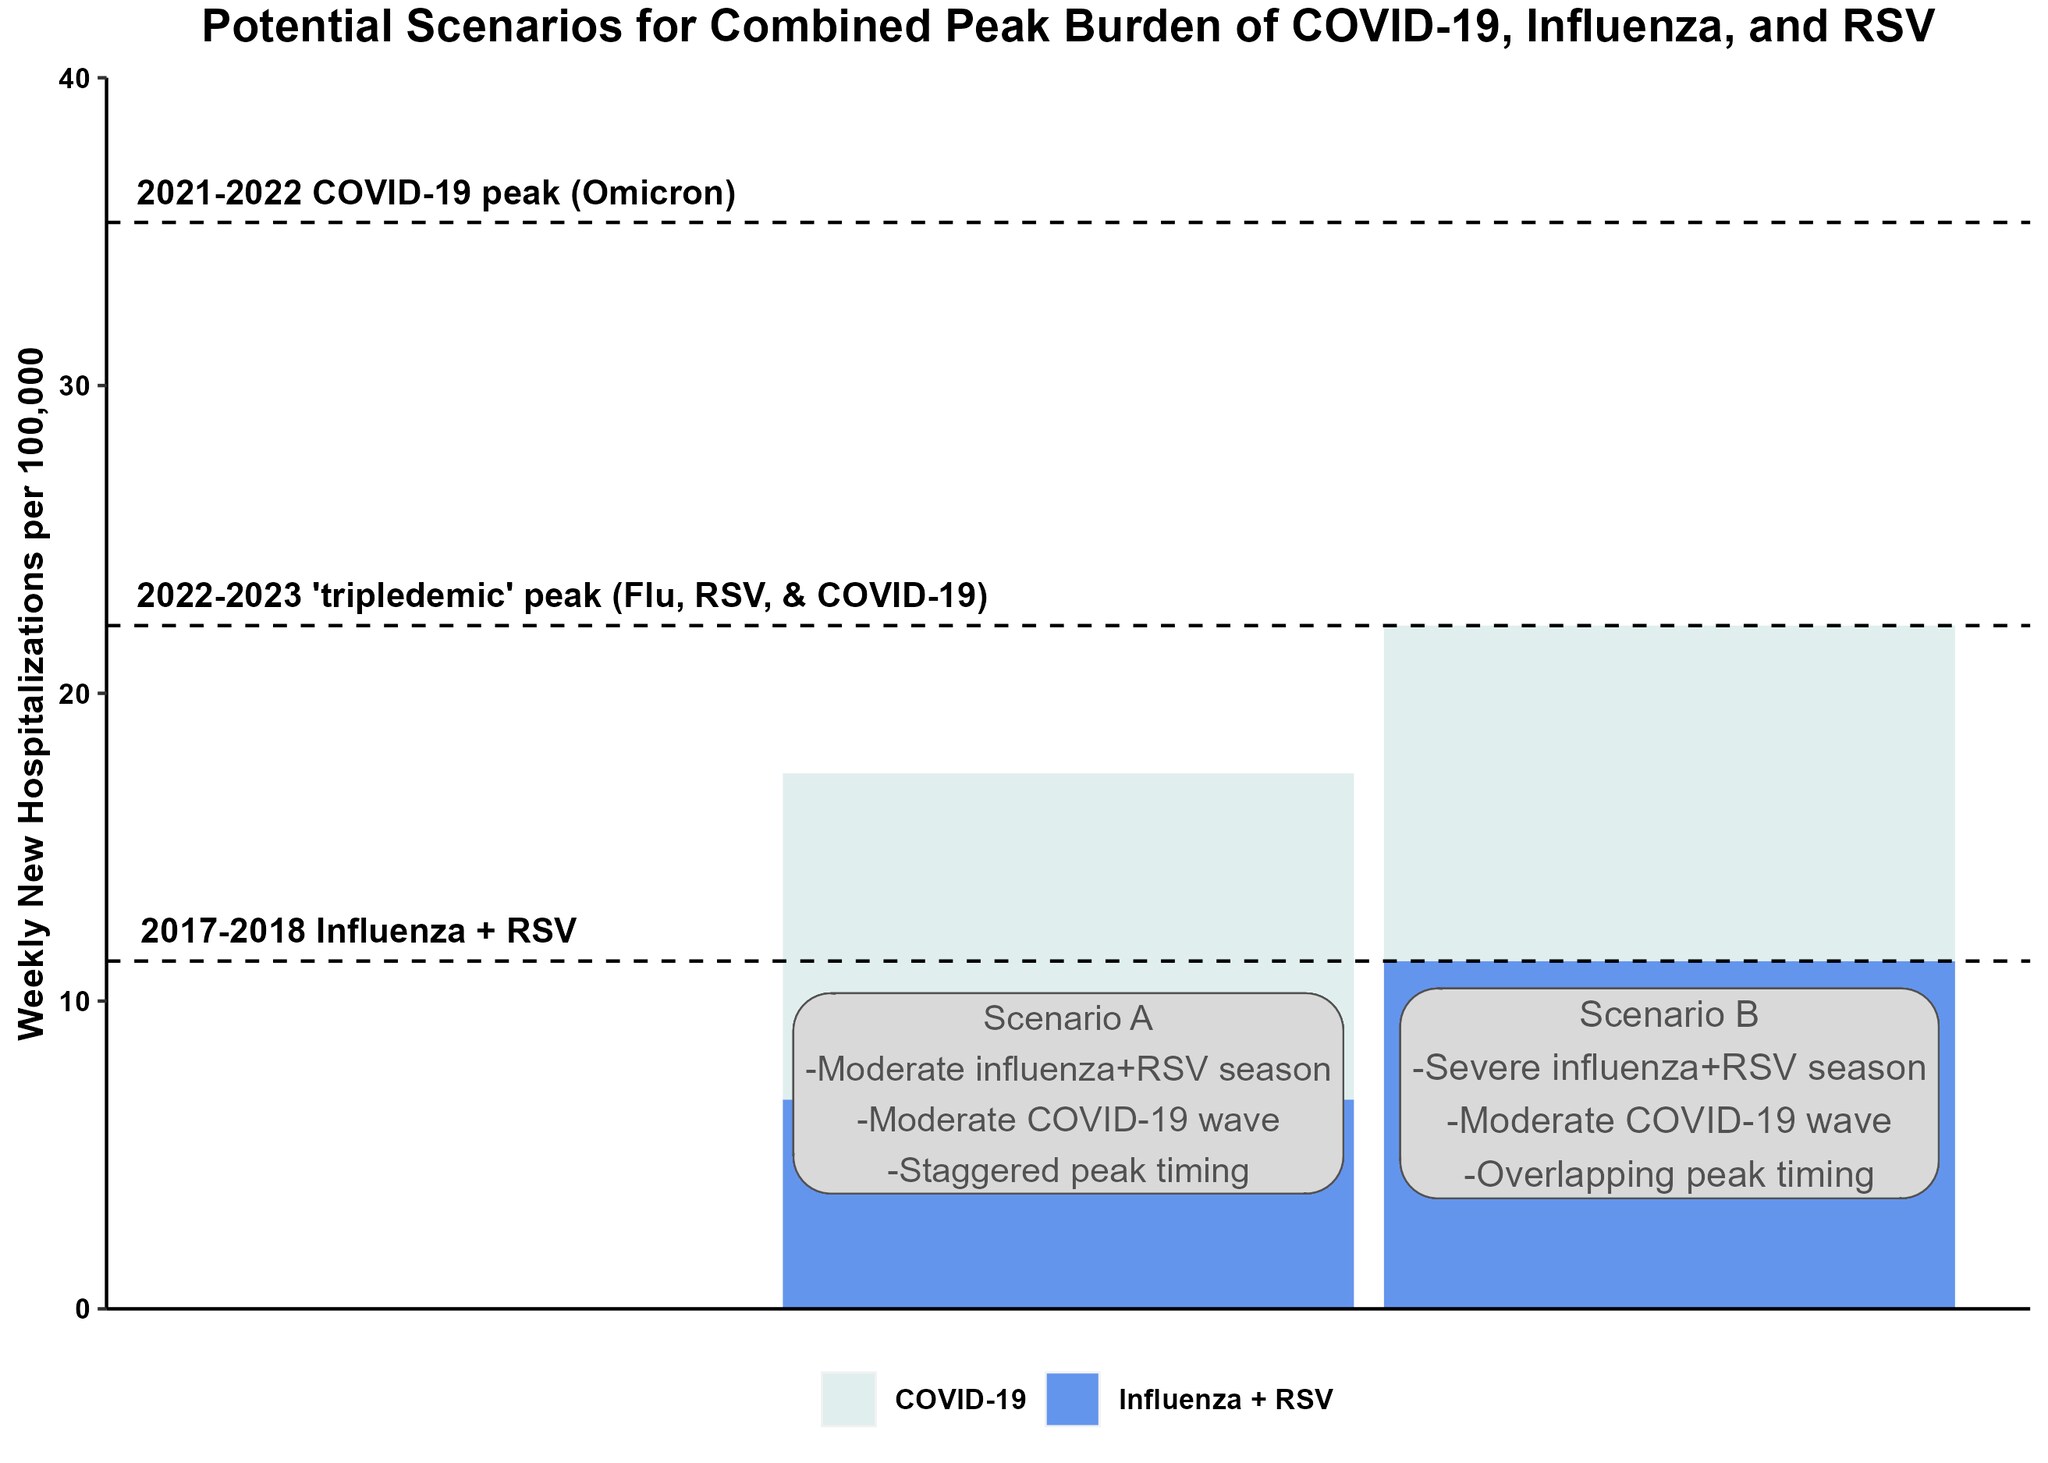 hypothetical scenarios for the peak hospital burden of COVID-19, influenza, and RSV